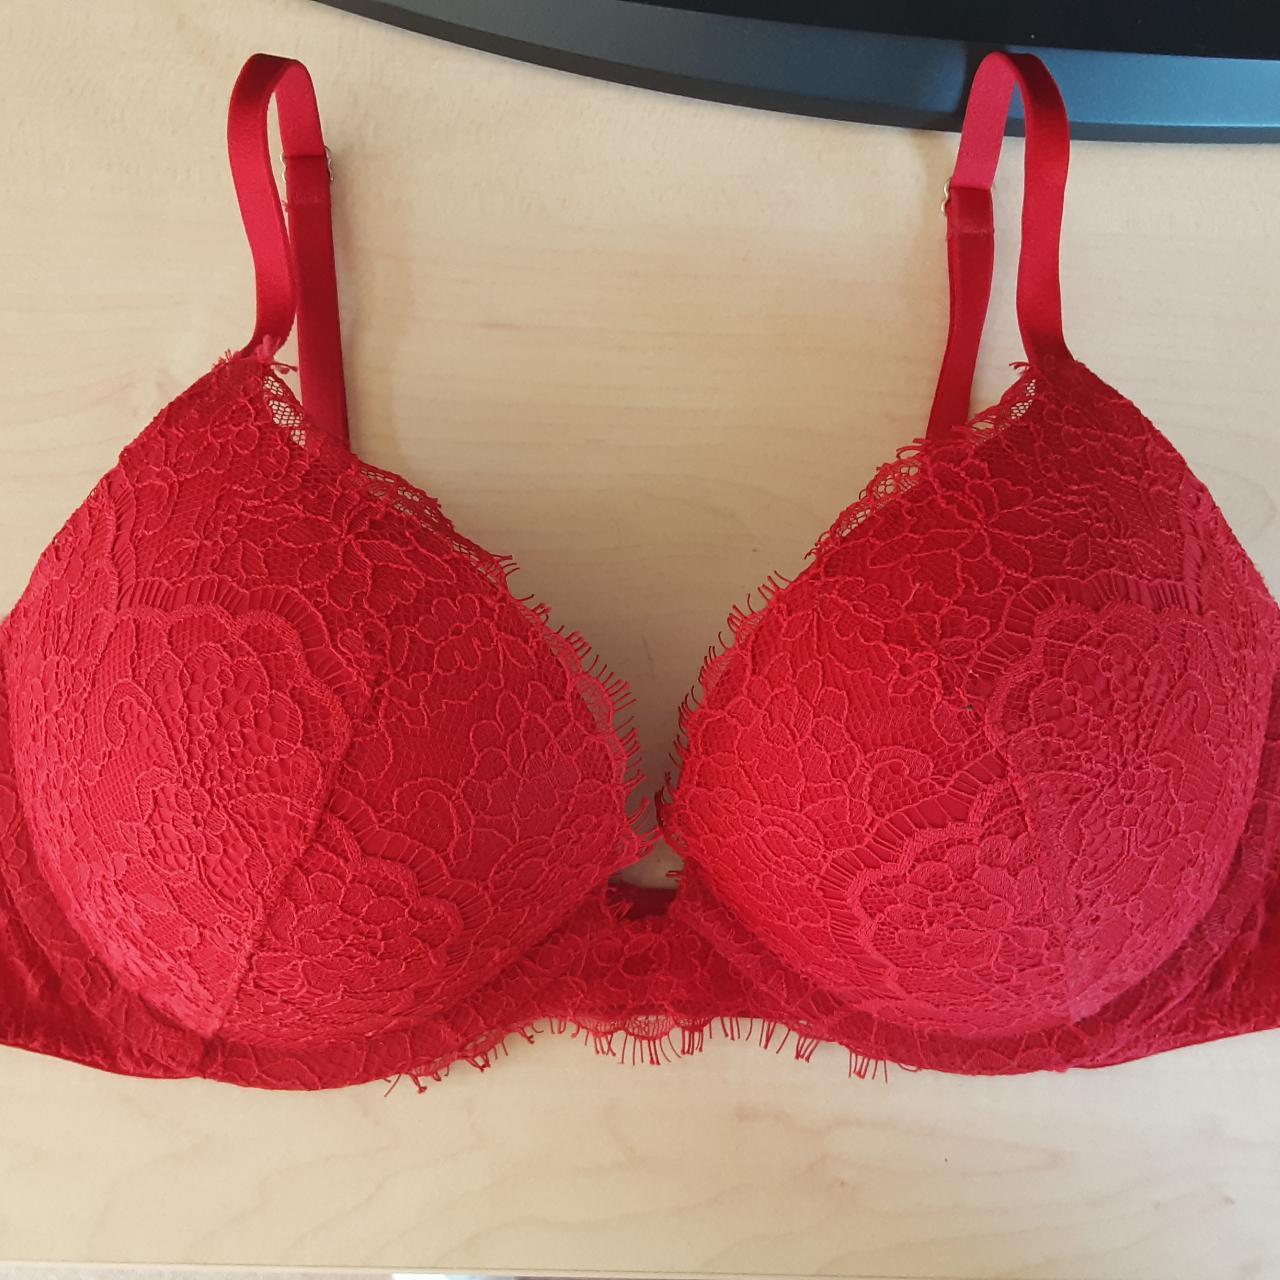 Victoria's Secret Gorgeous Push Up Bra 34C and Med Panty New with